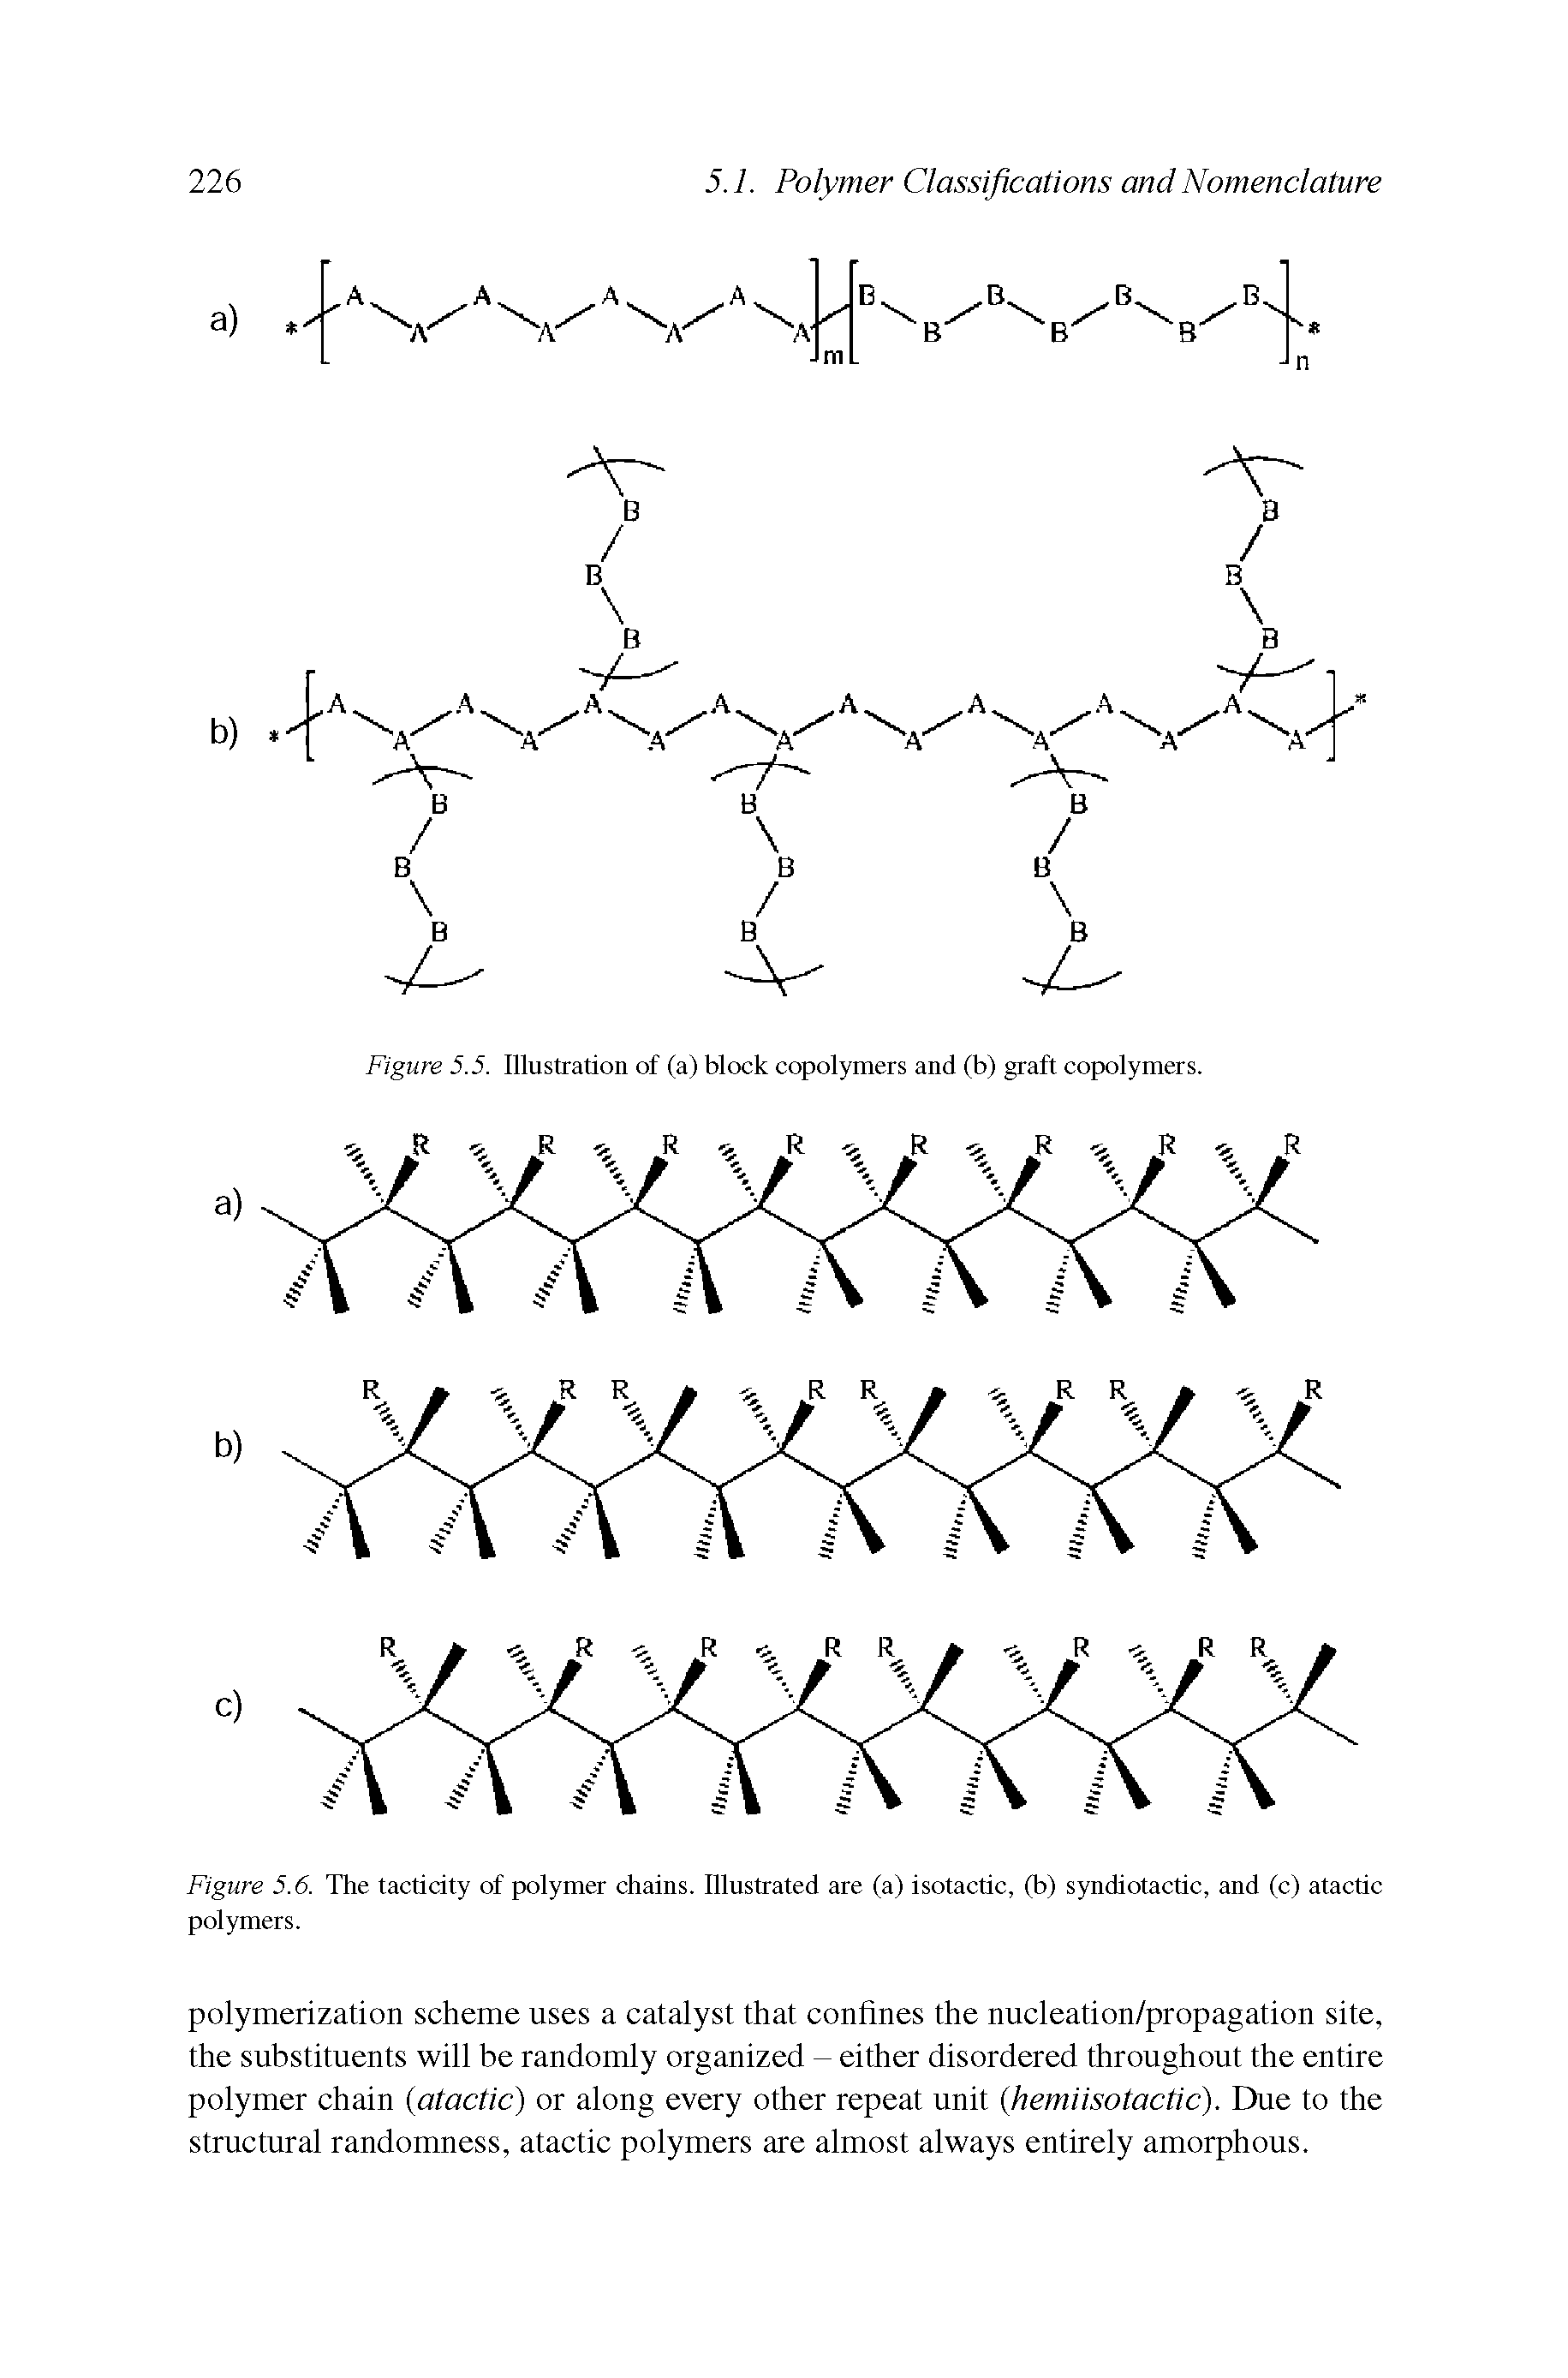 Figure 5.6. The tacticity of polymer chains. Illustrated are (a) isotactic, (b) syndiotactic, and (c) atactic polymers.